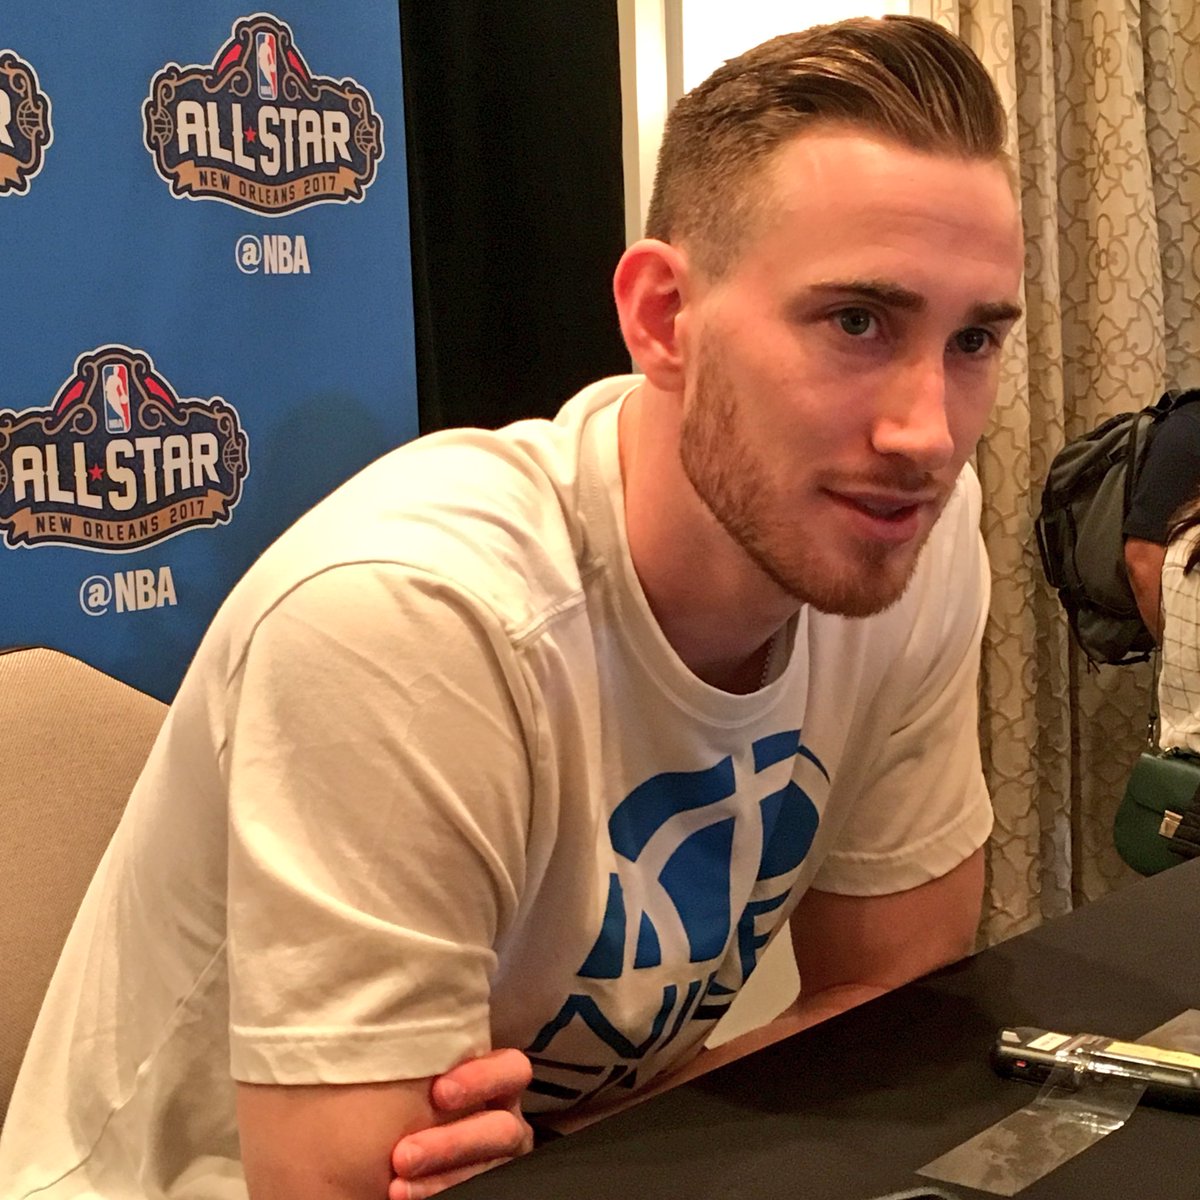 "I want to have fun, try to enjoy the moment and hopefully hit a few shots." #GordonHayward https://t.co/gcRlBR5zF4